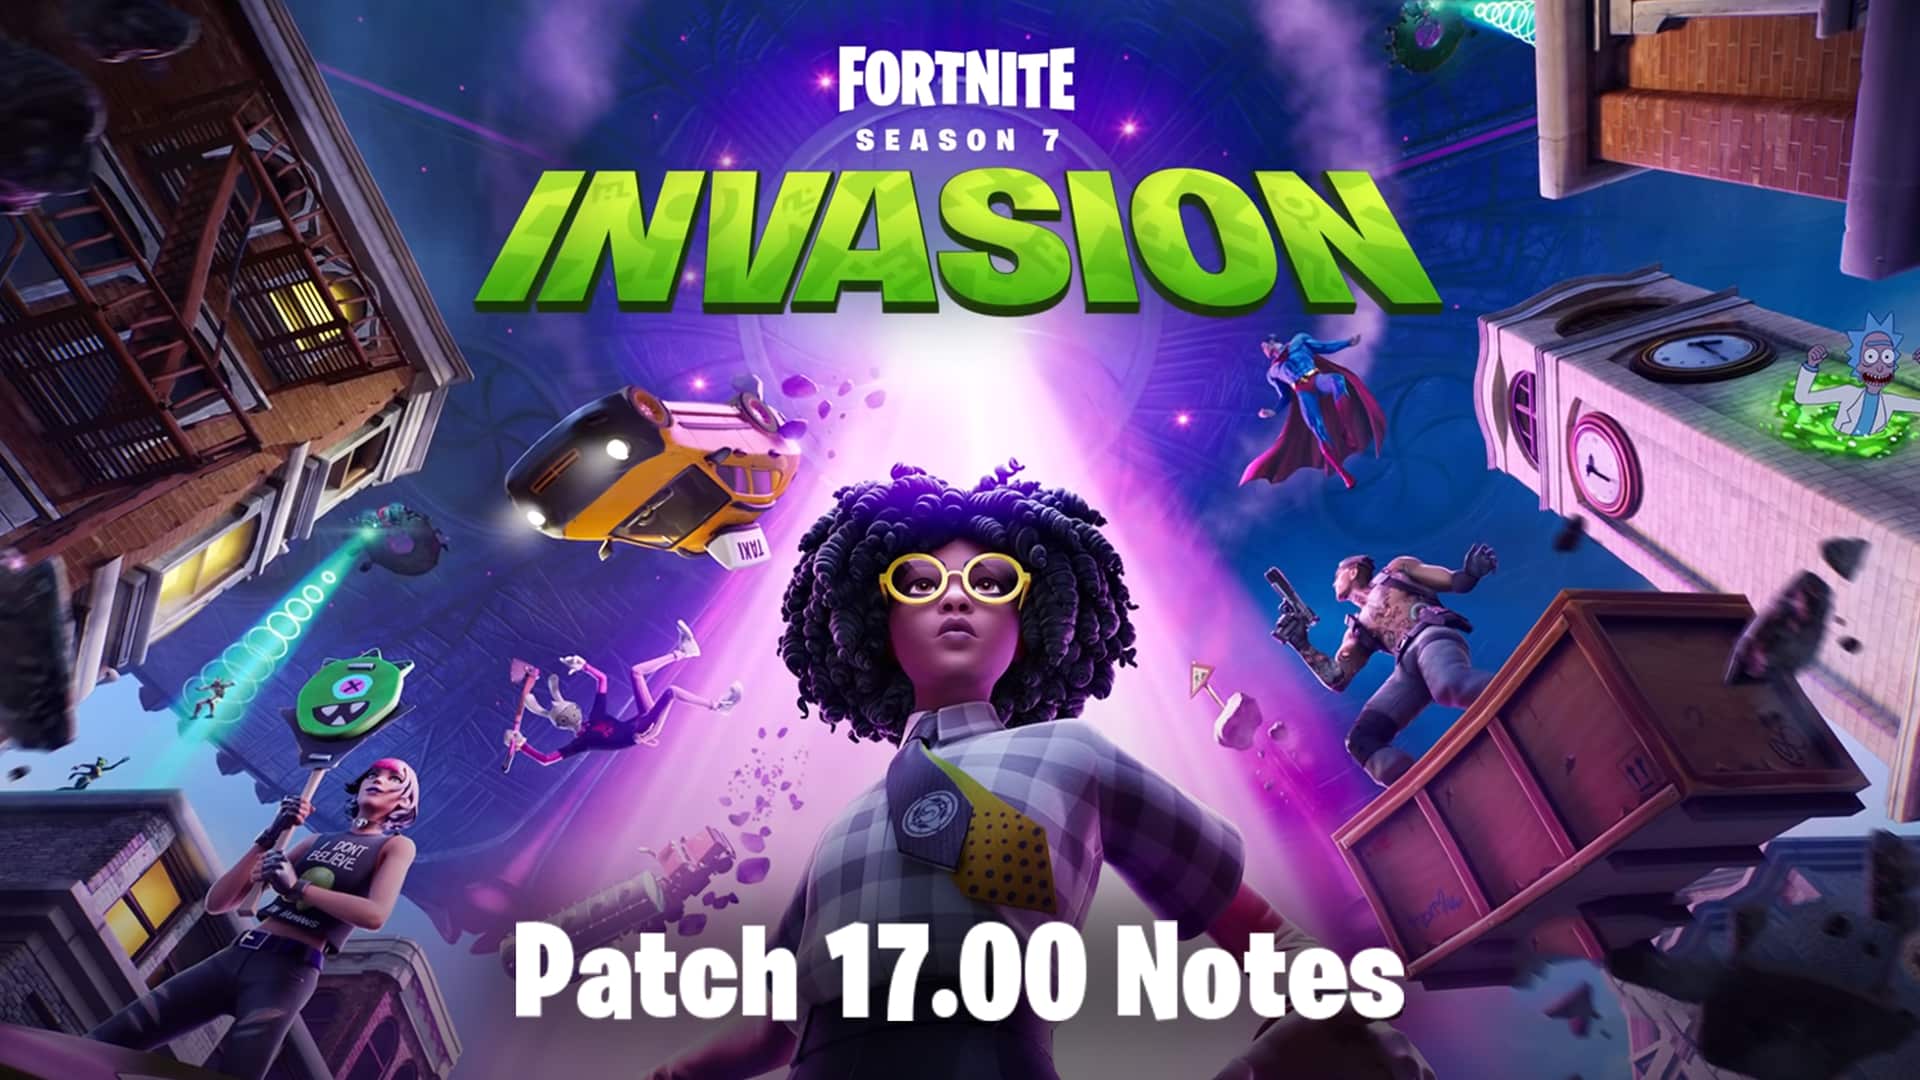 Fortnite Season 7 Invasion patch 17.00 notes.